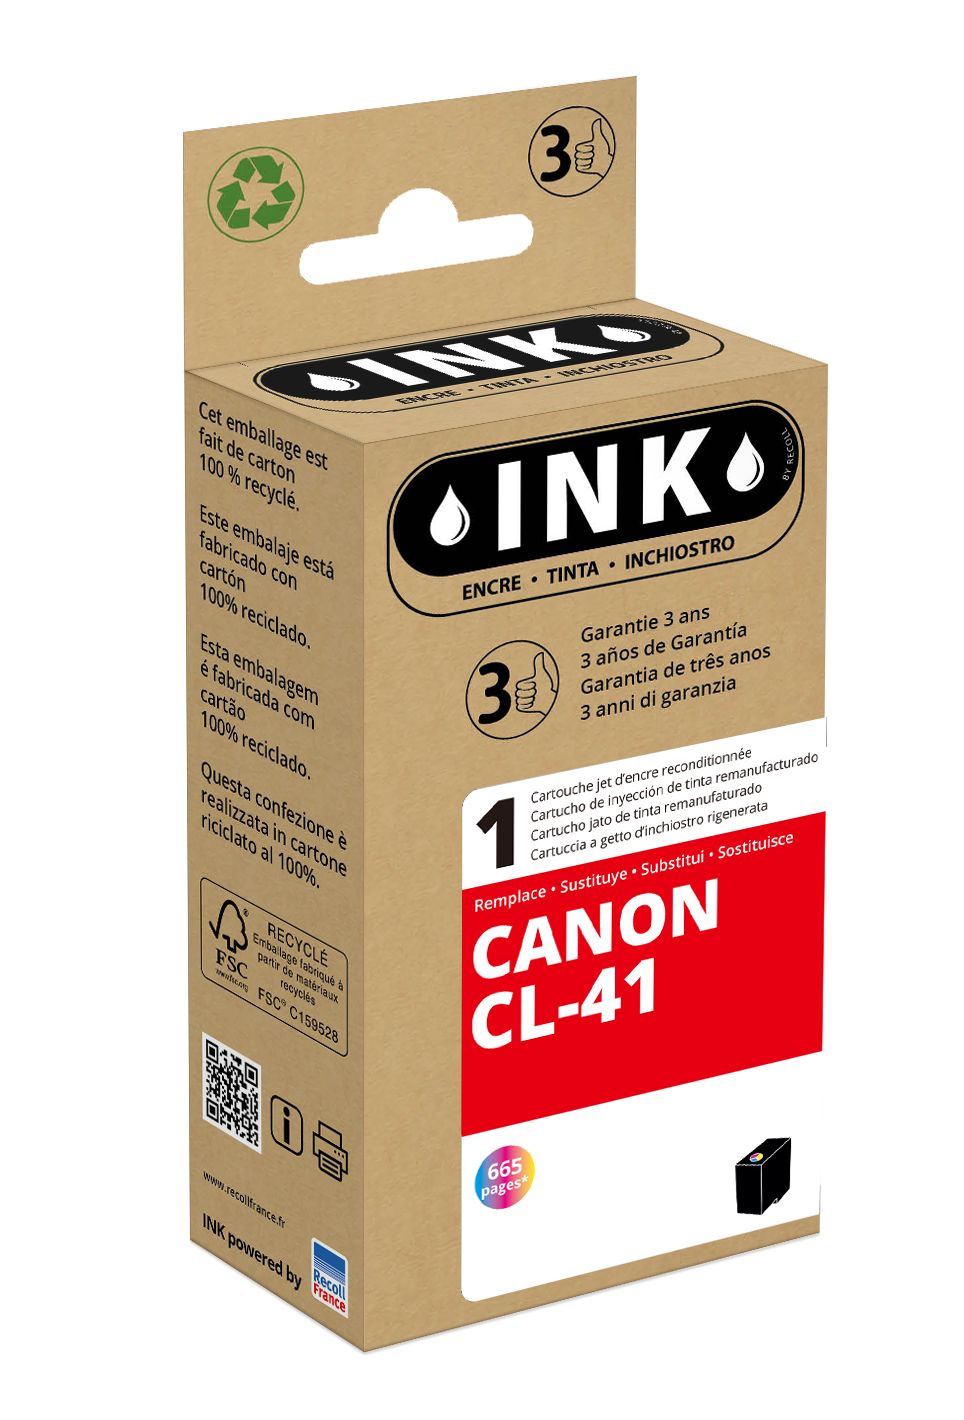 Cartouche compatible Canon CL-41 - cyan, magenta, jaune - ink